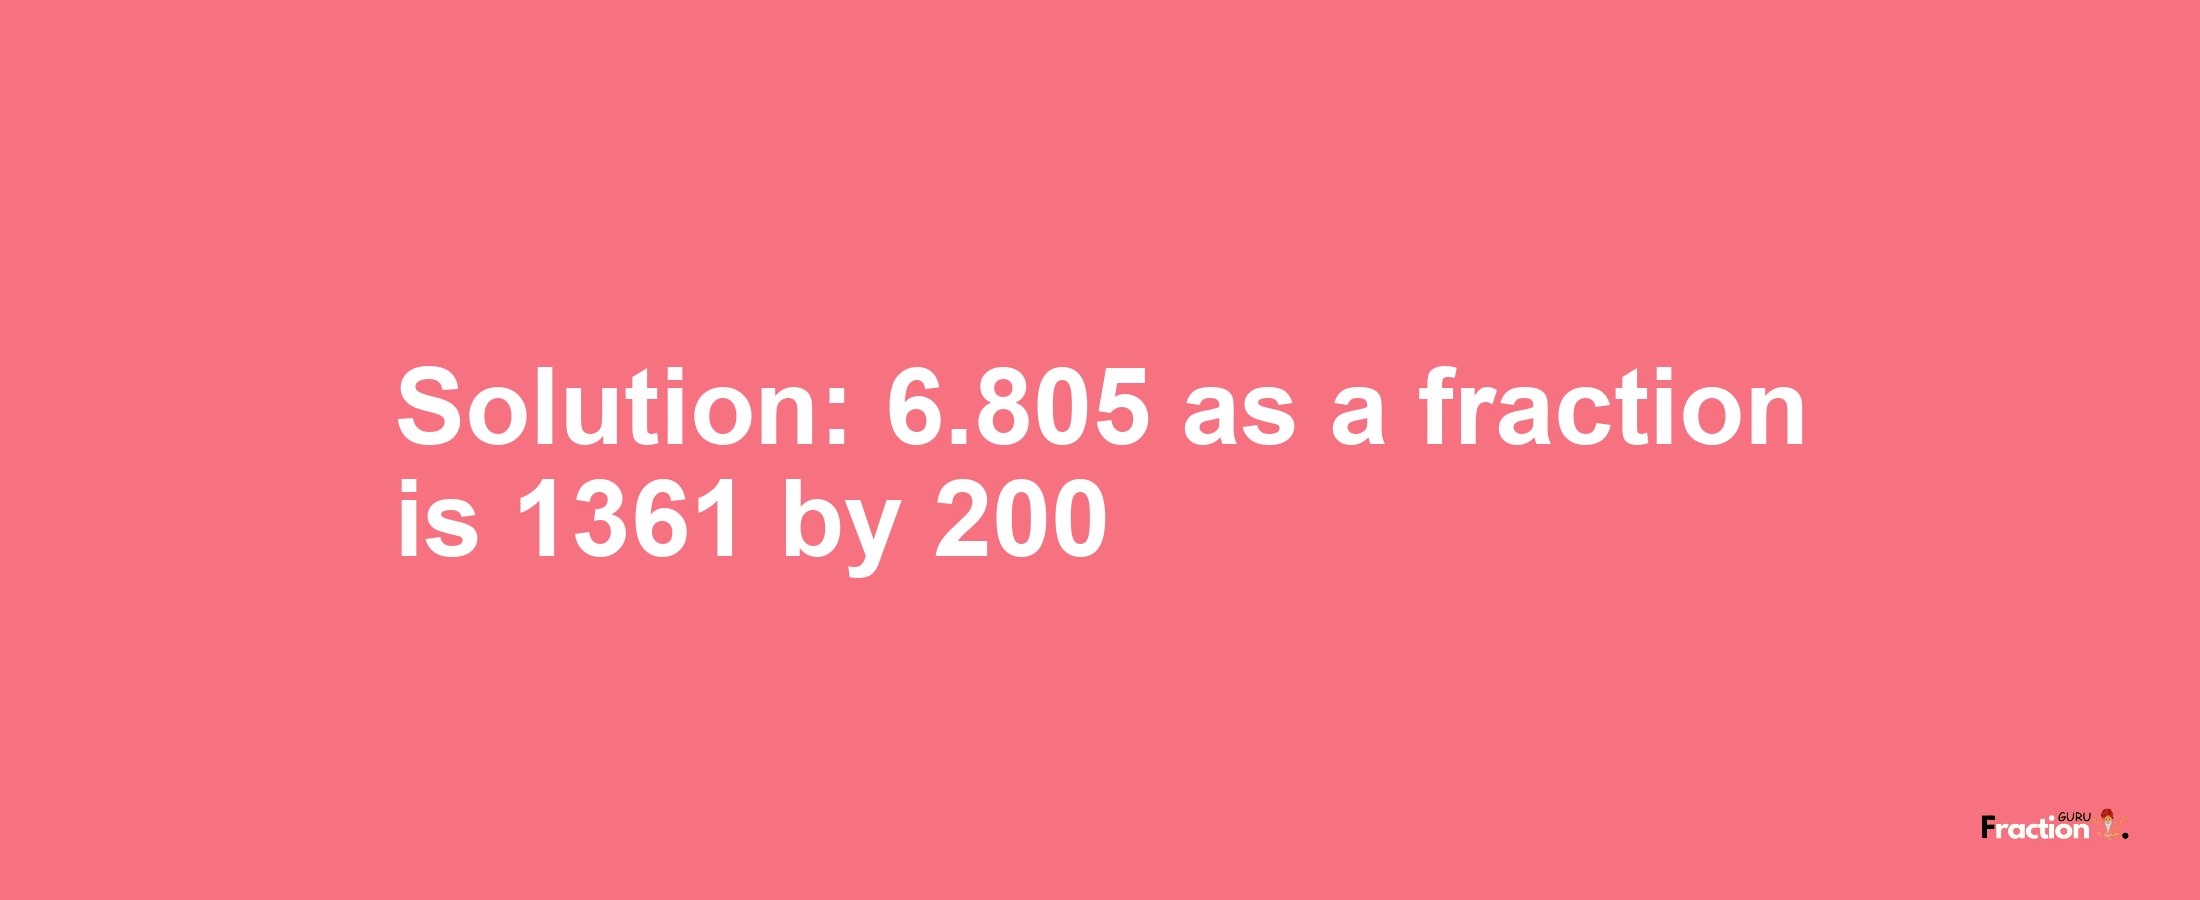 Solution:6.805 as a fraction is 1361/200